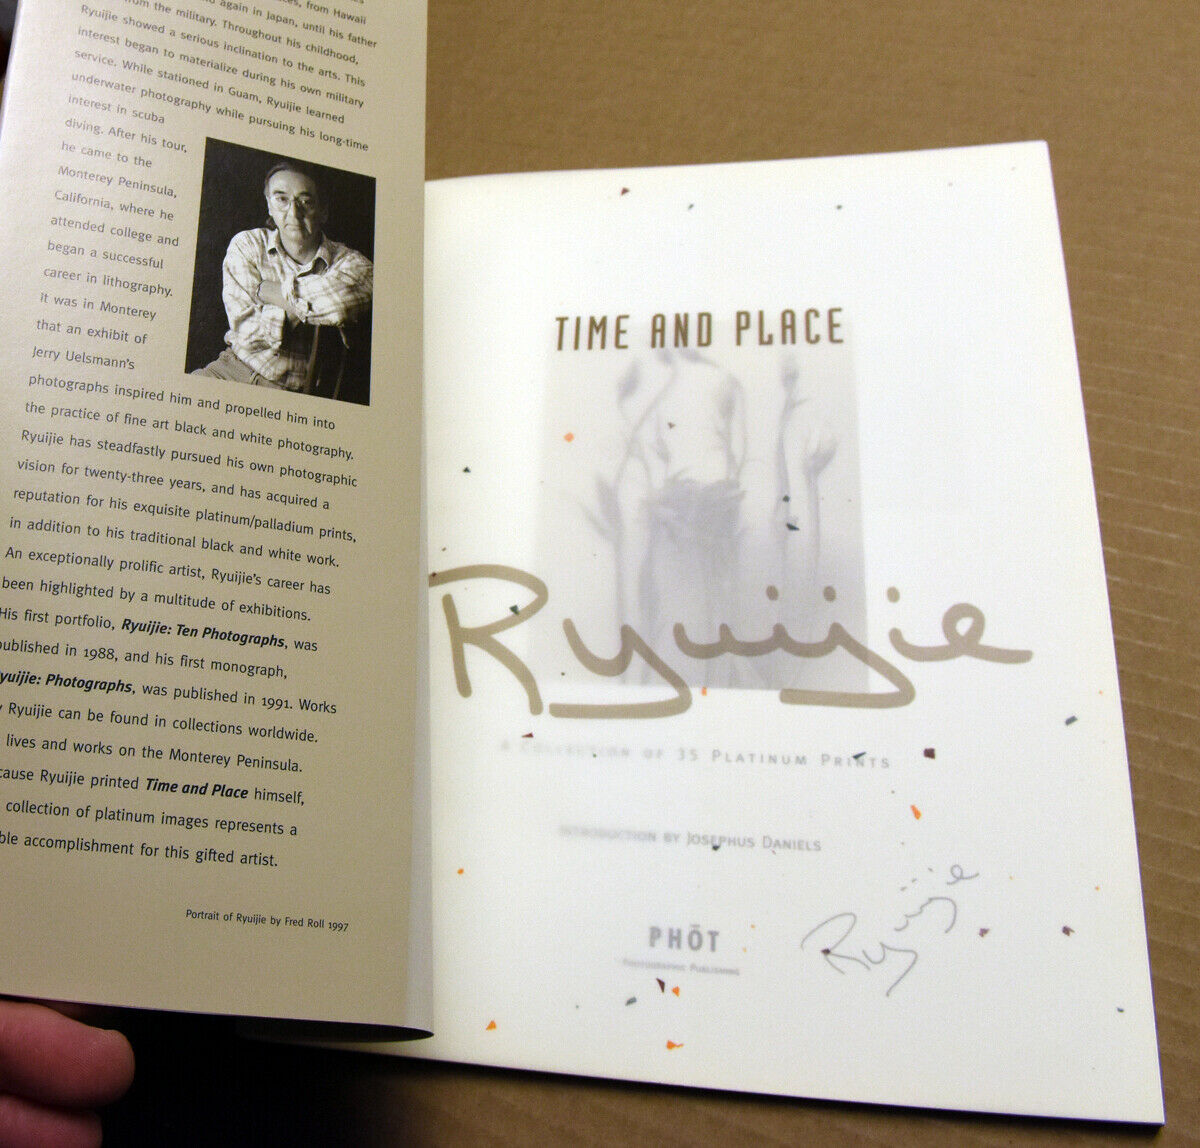 Ryuijie - Time and Place, First Edition, 1998 - Signed